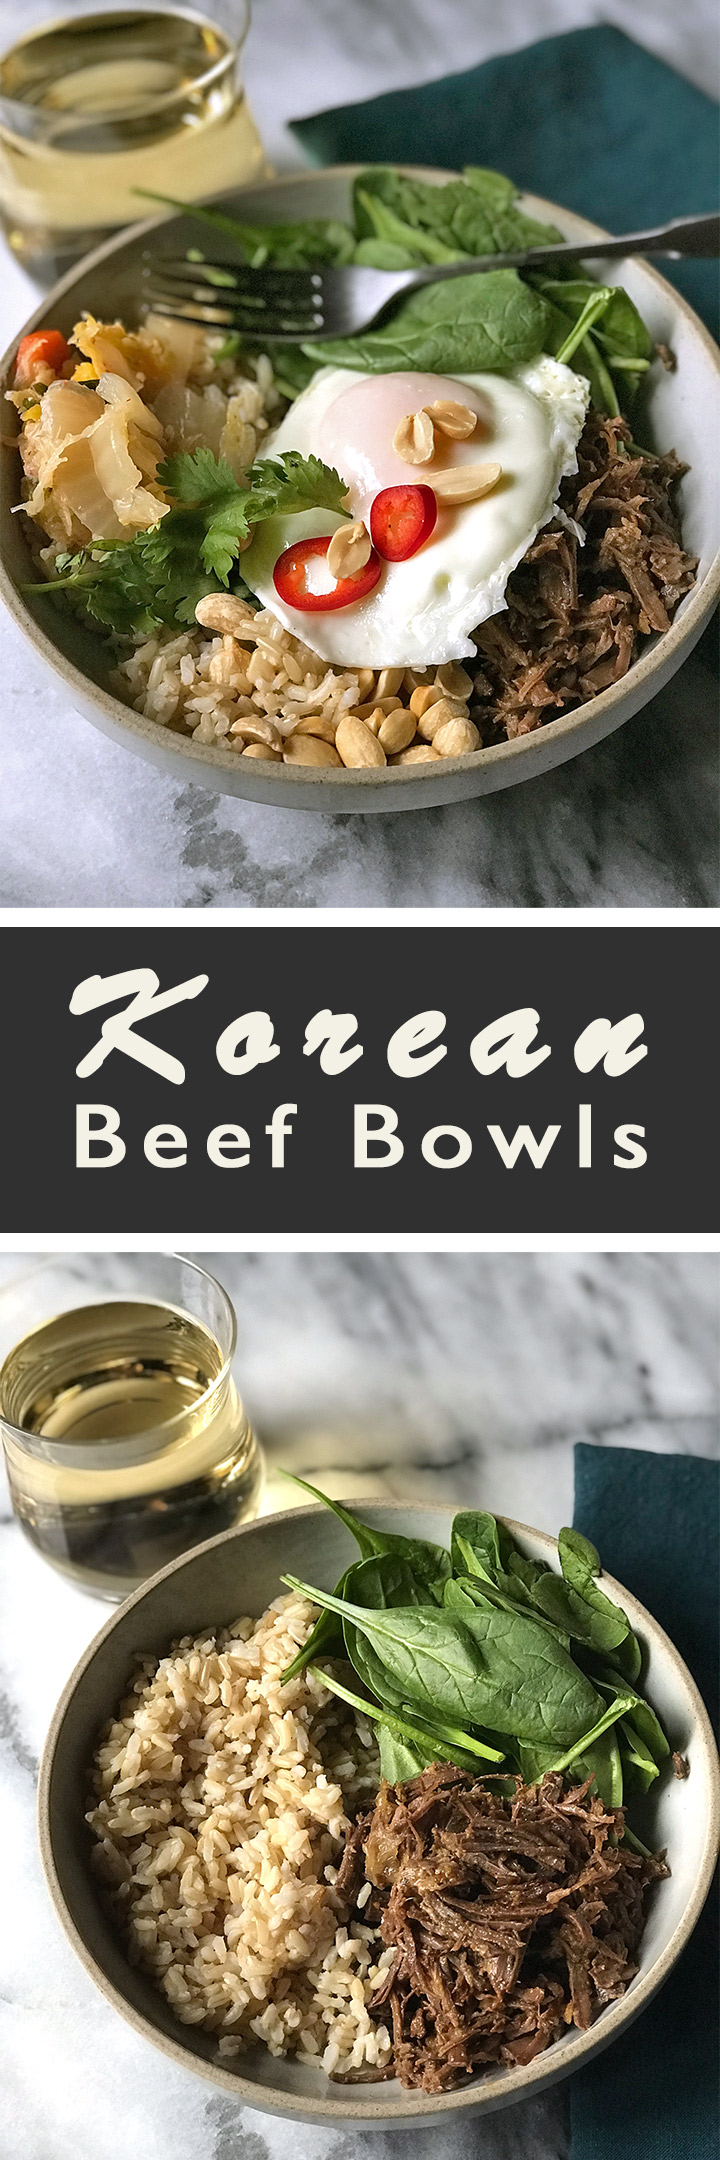 Korean Beef Bowls! All the delicious parts made however you like: shredded beef, spinach, grain, kimchi, peanuts, cilantro, over-easy egg and pass the hot sauce! | shemadeitshemight.com